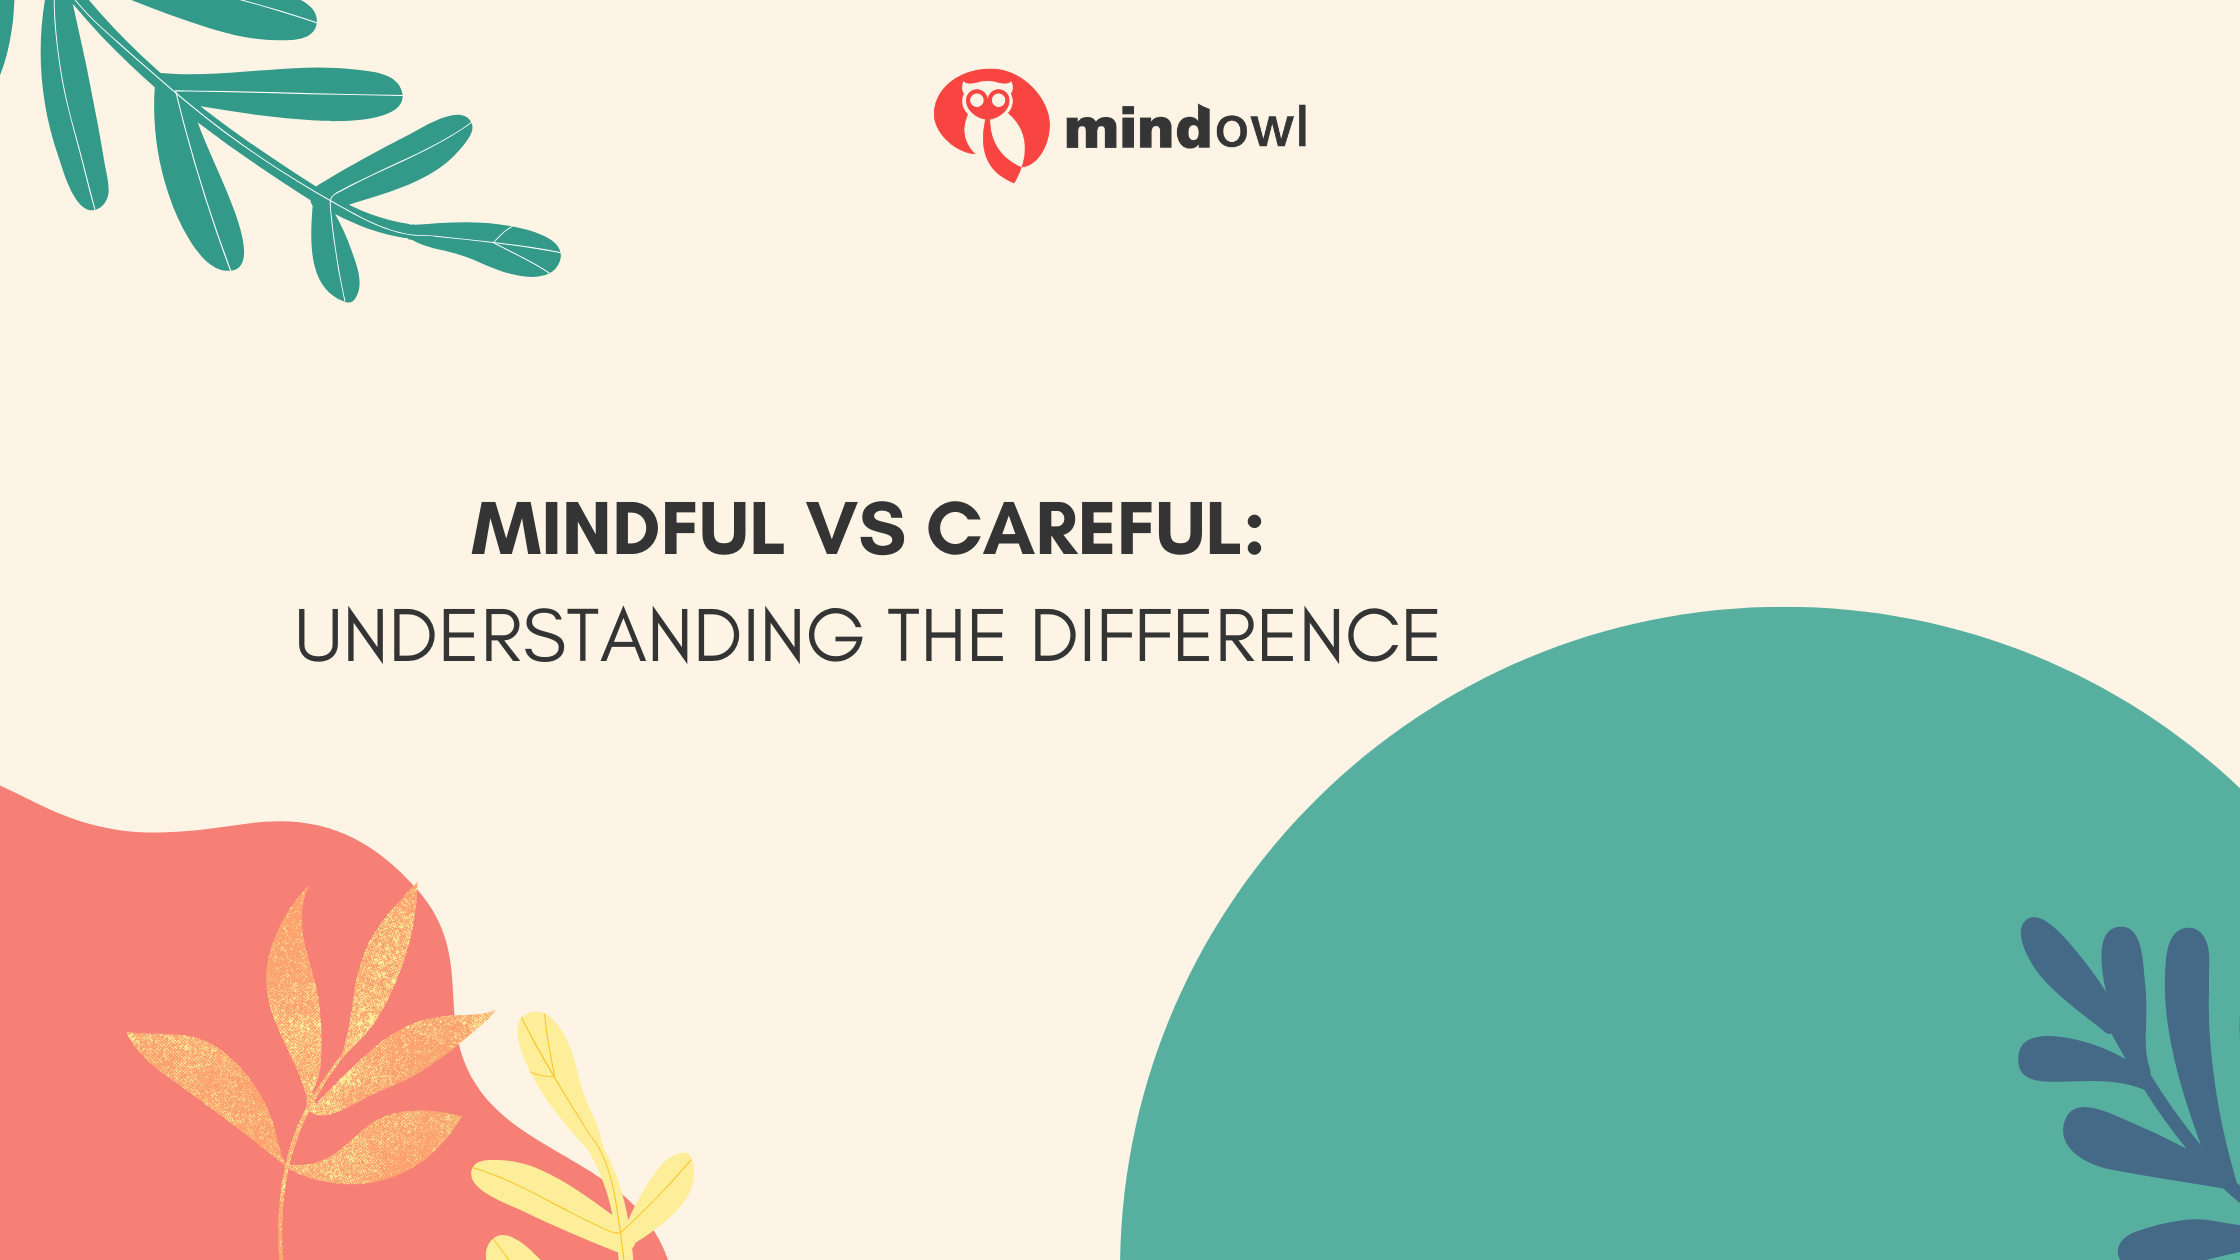 Mindful Vs Careful: Understanding The Difference